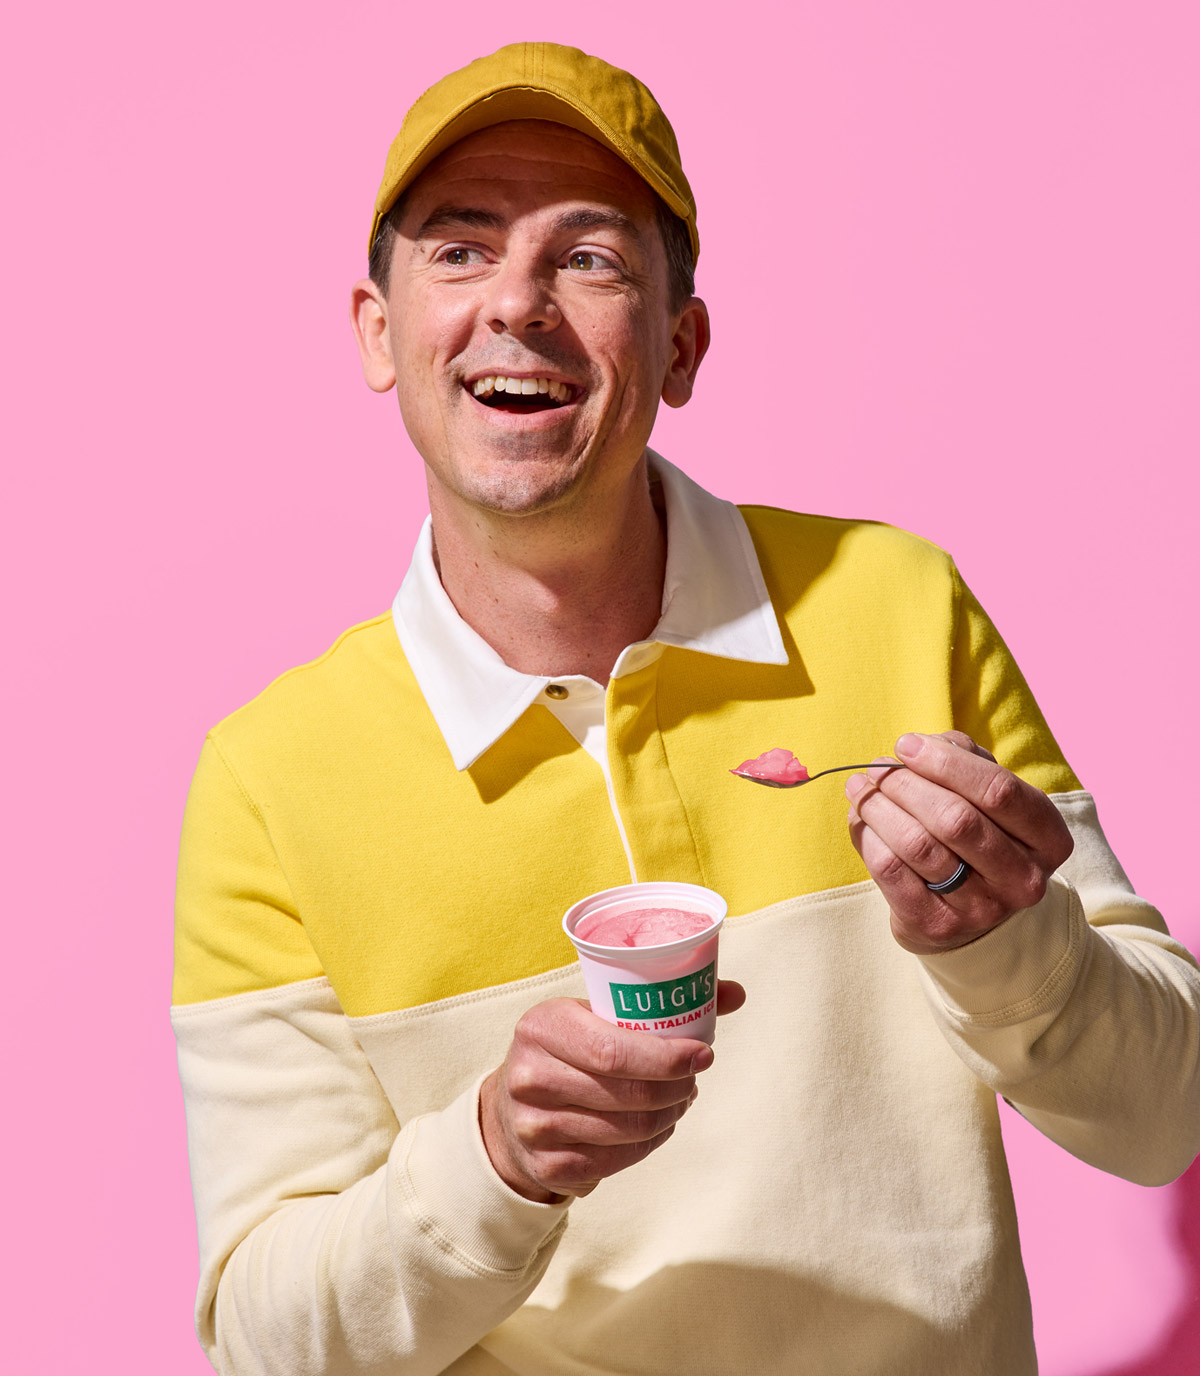 Man wearing yellow shirt and yellow hat eating cherry lemon swirl LUIGI'S Real Italian Ice. Background is pink. Man is smiling and holding cup of Italian ice and spoon.